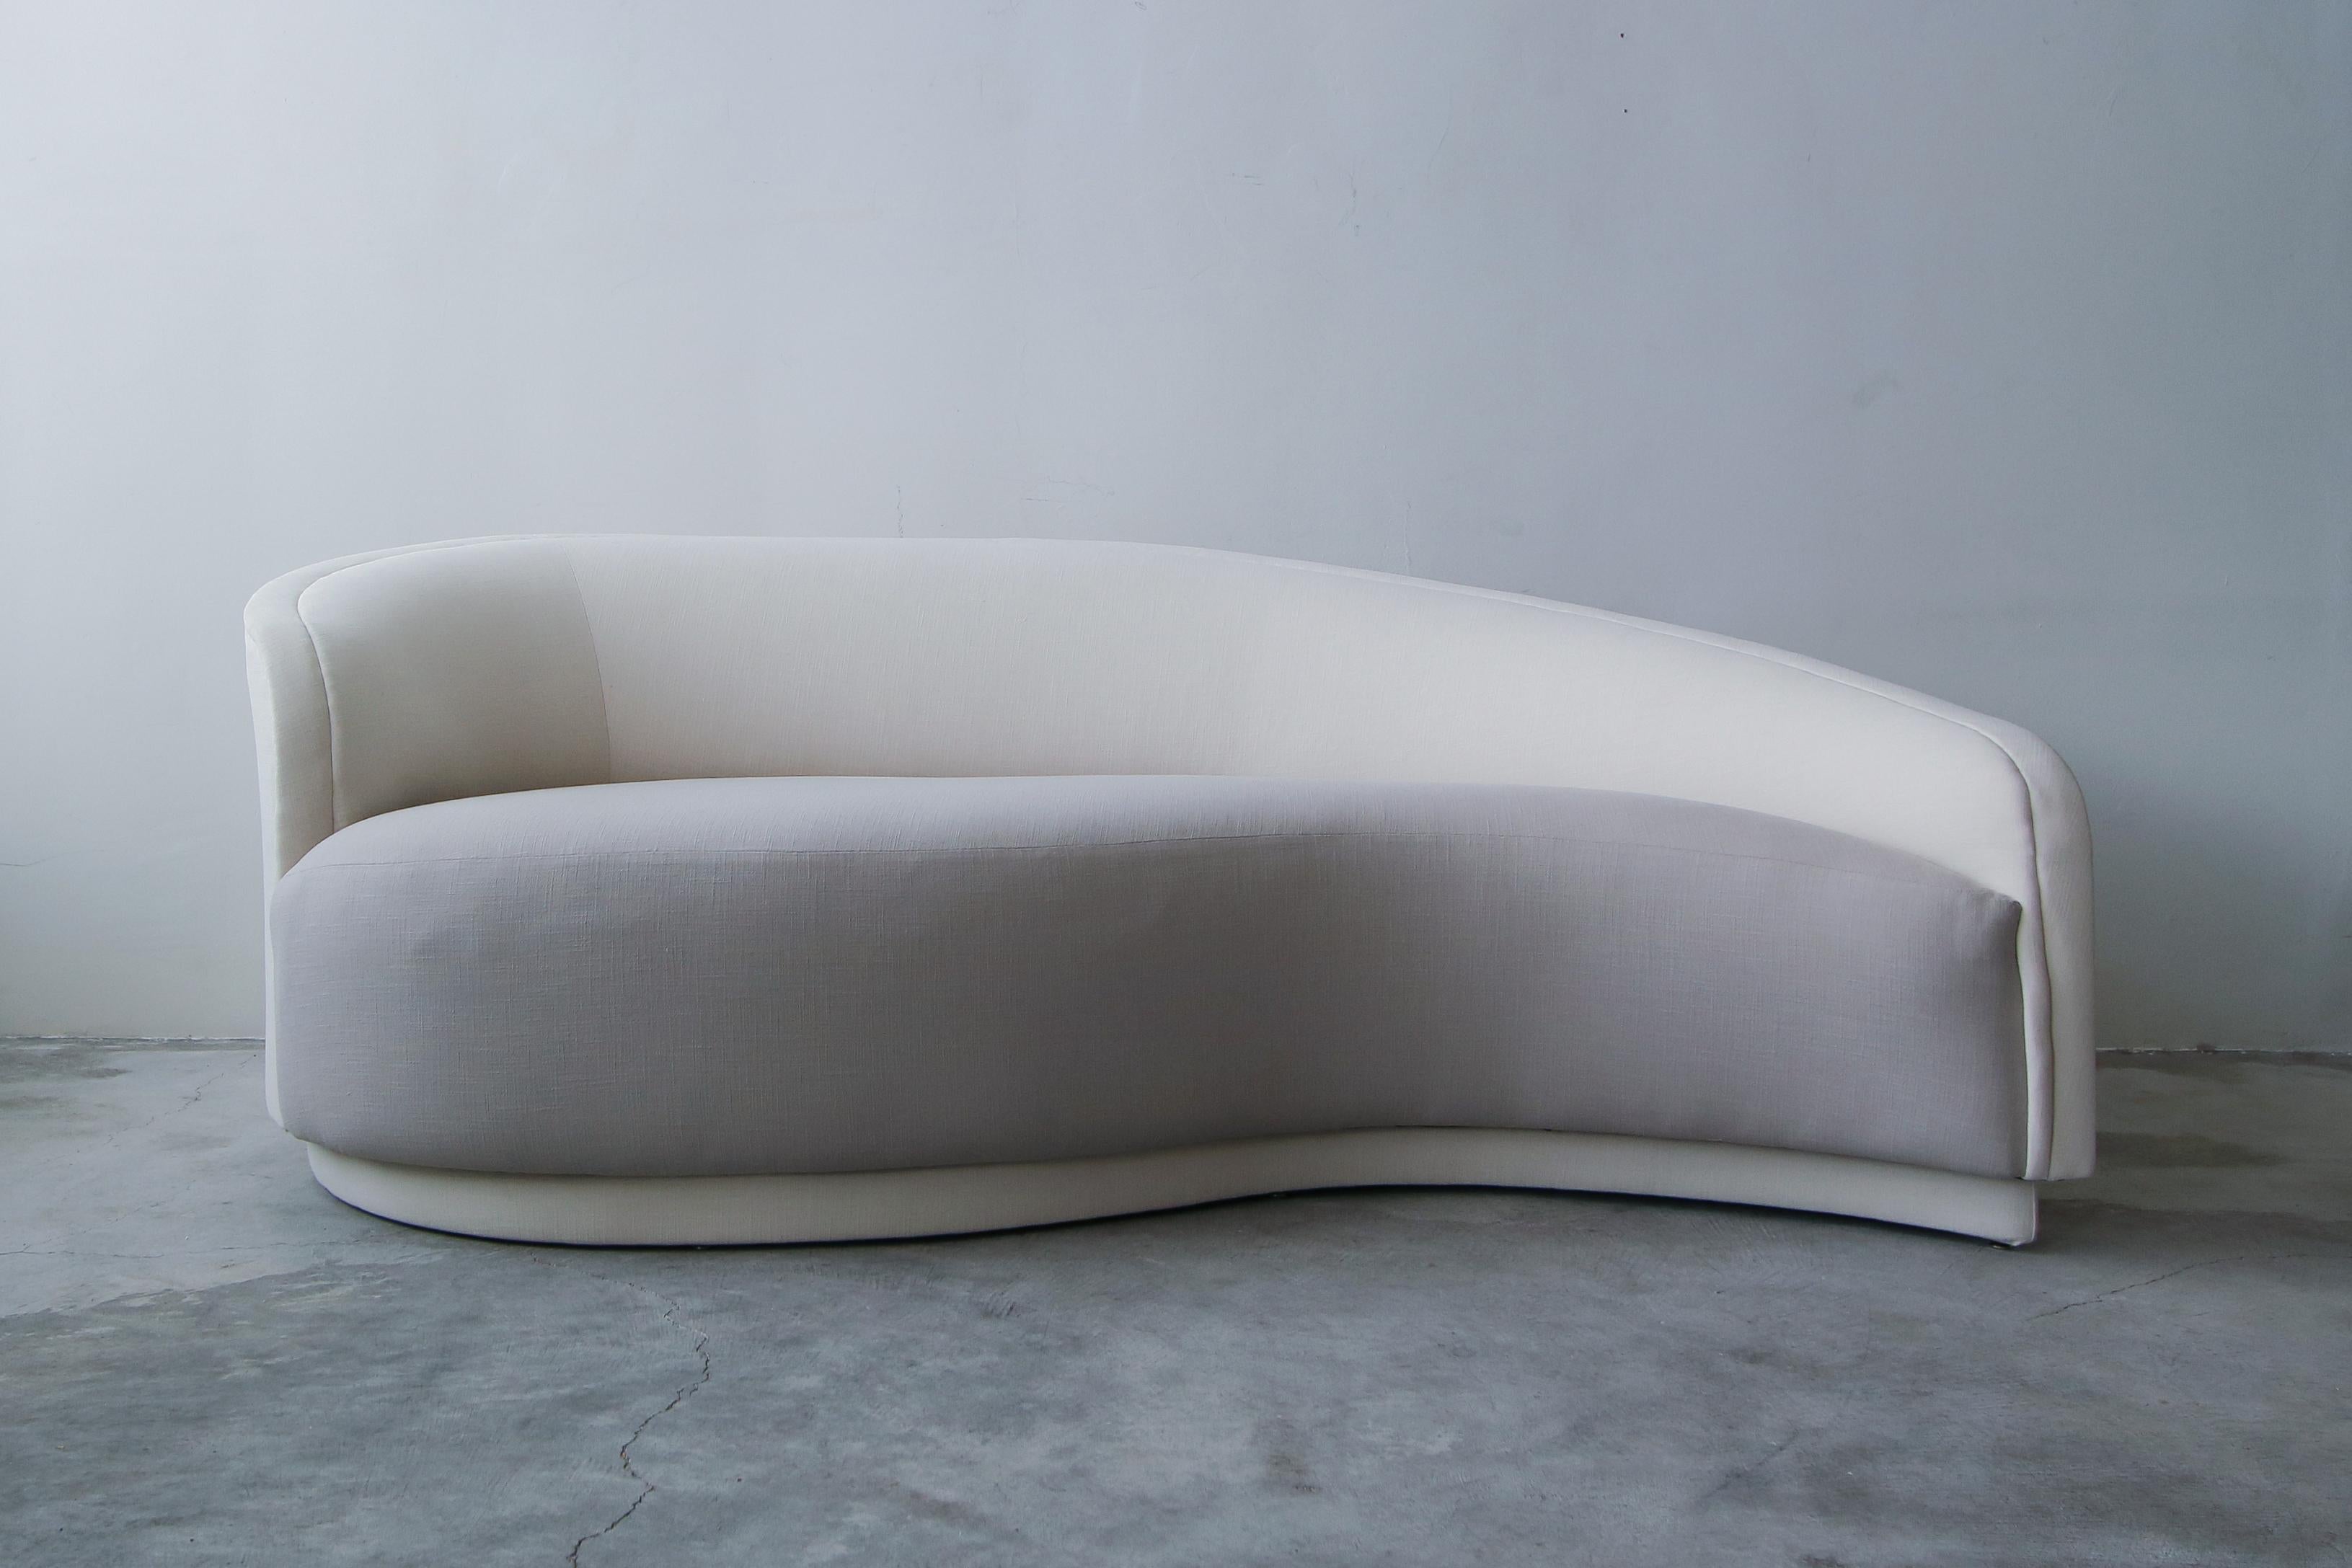 20th Century Petite Curved Sofa and Ottoman by Vladimir Kagan for Weiman